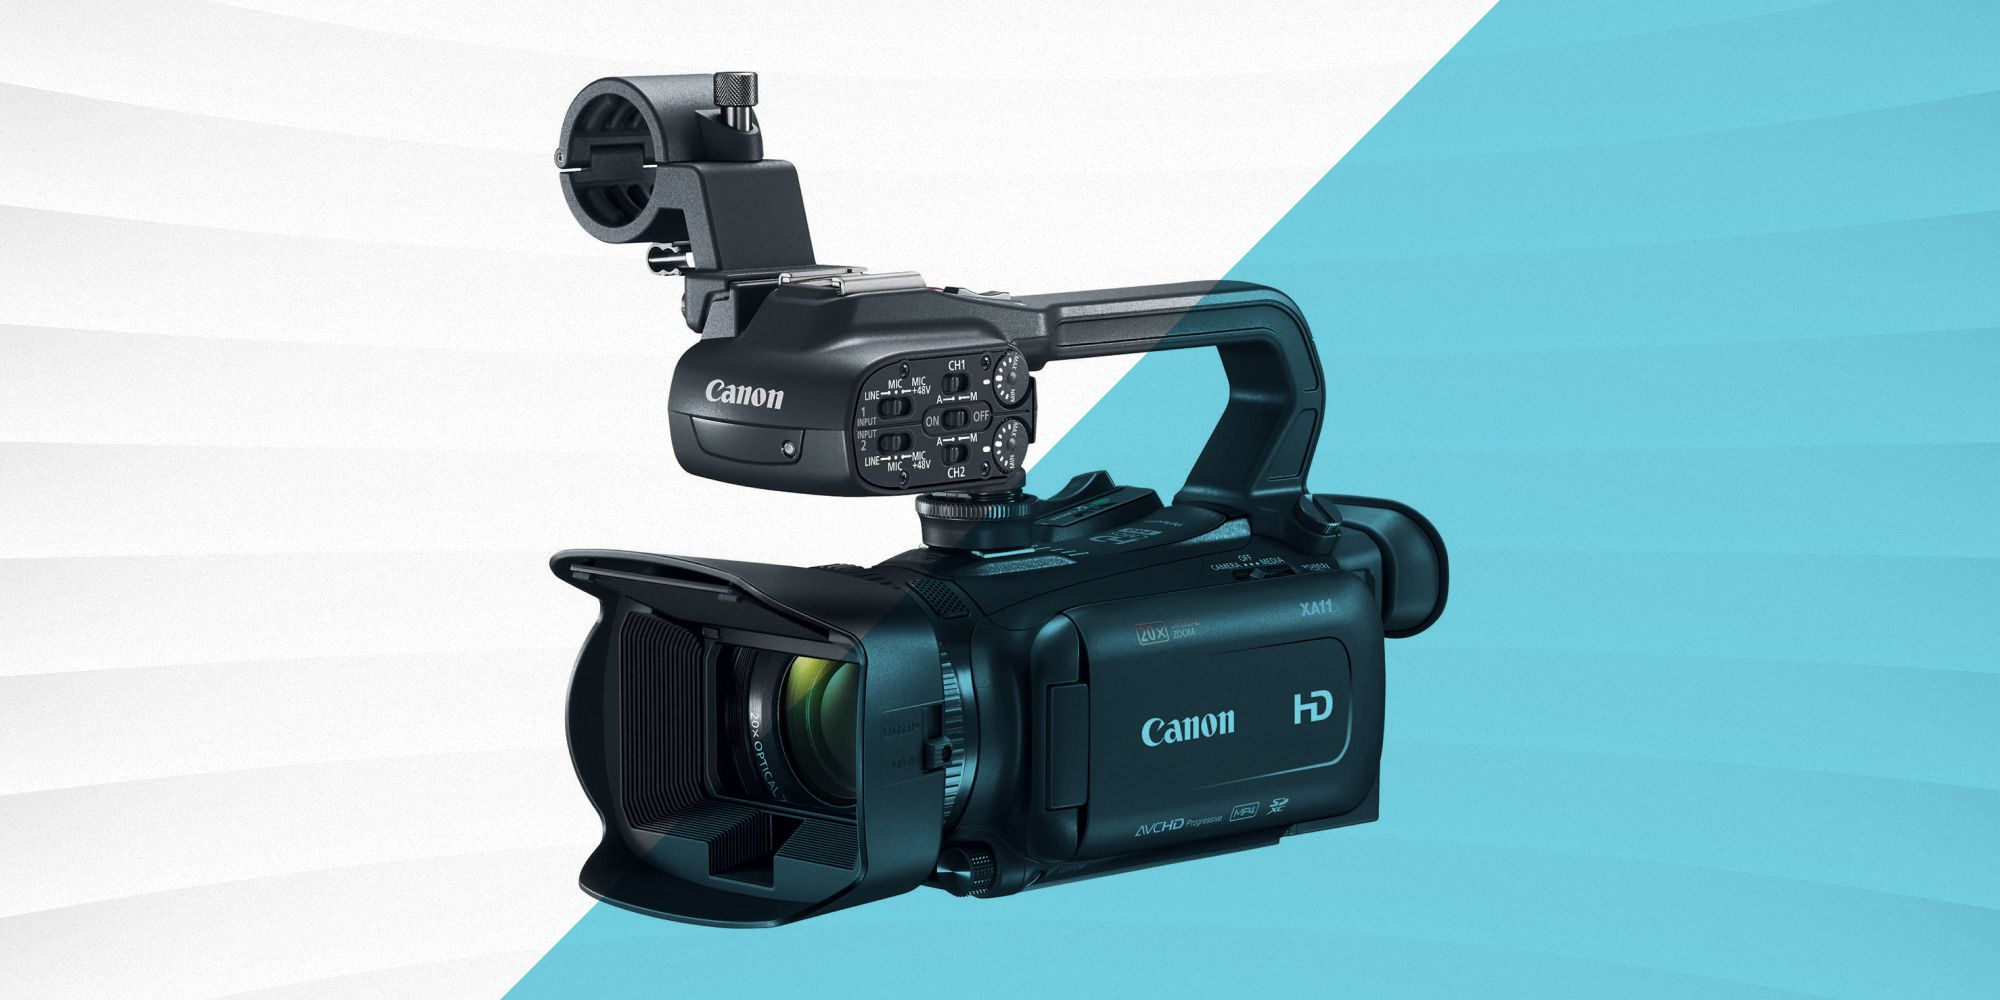 Support for Camcorders and Video Cameras